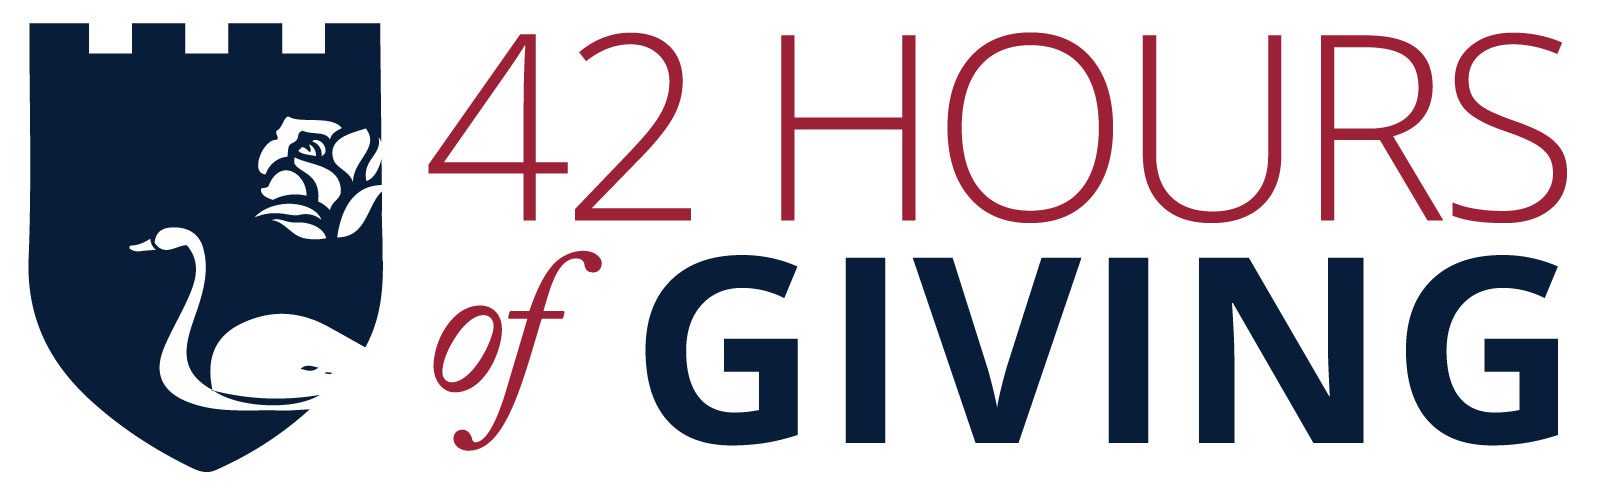 42-Hours-of-Giving-Logo-1600px